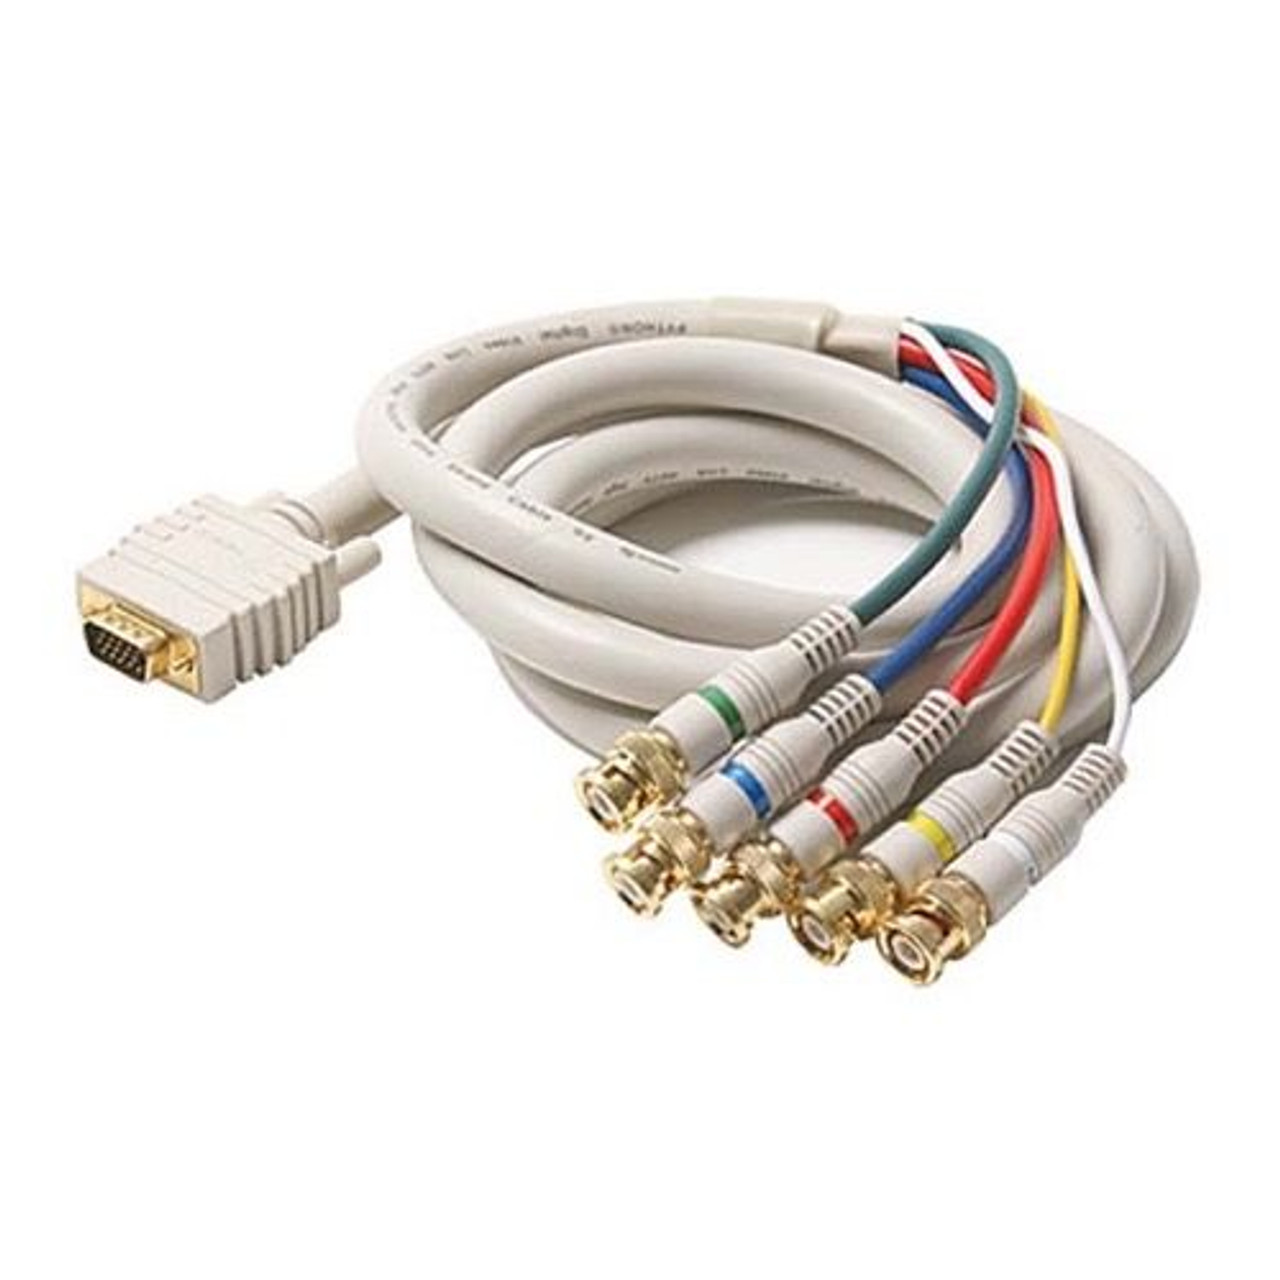 Steren 253-812IV 12' FT SVGA Python HDTV Video Component Cable to 5 BNC Male HD-15 VGA RGBYW Audio Dual Shield Ivory Cable Stereo 5-BNC Male to SVGA 24 K Gold Plate Color Coded Digital Signal Jumper, Part # 253812-IV